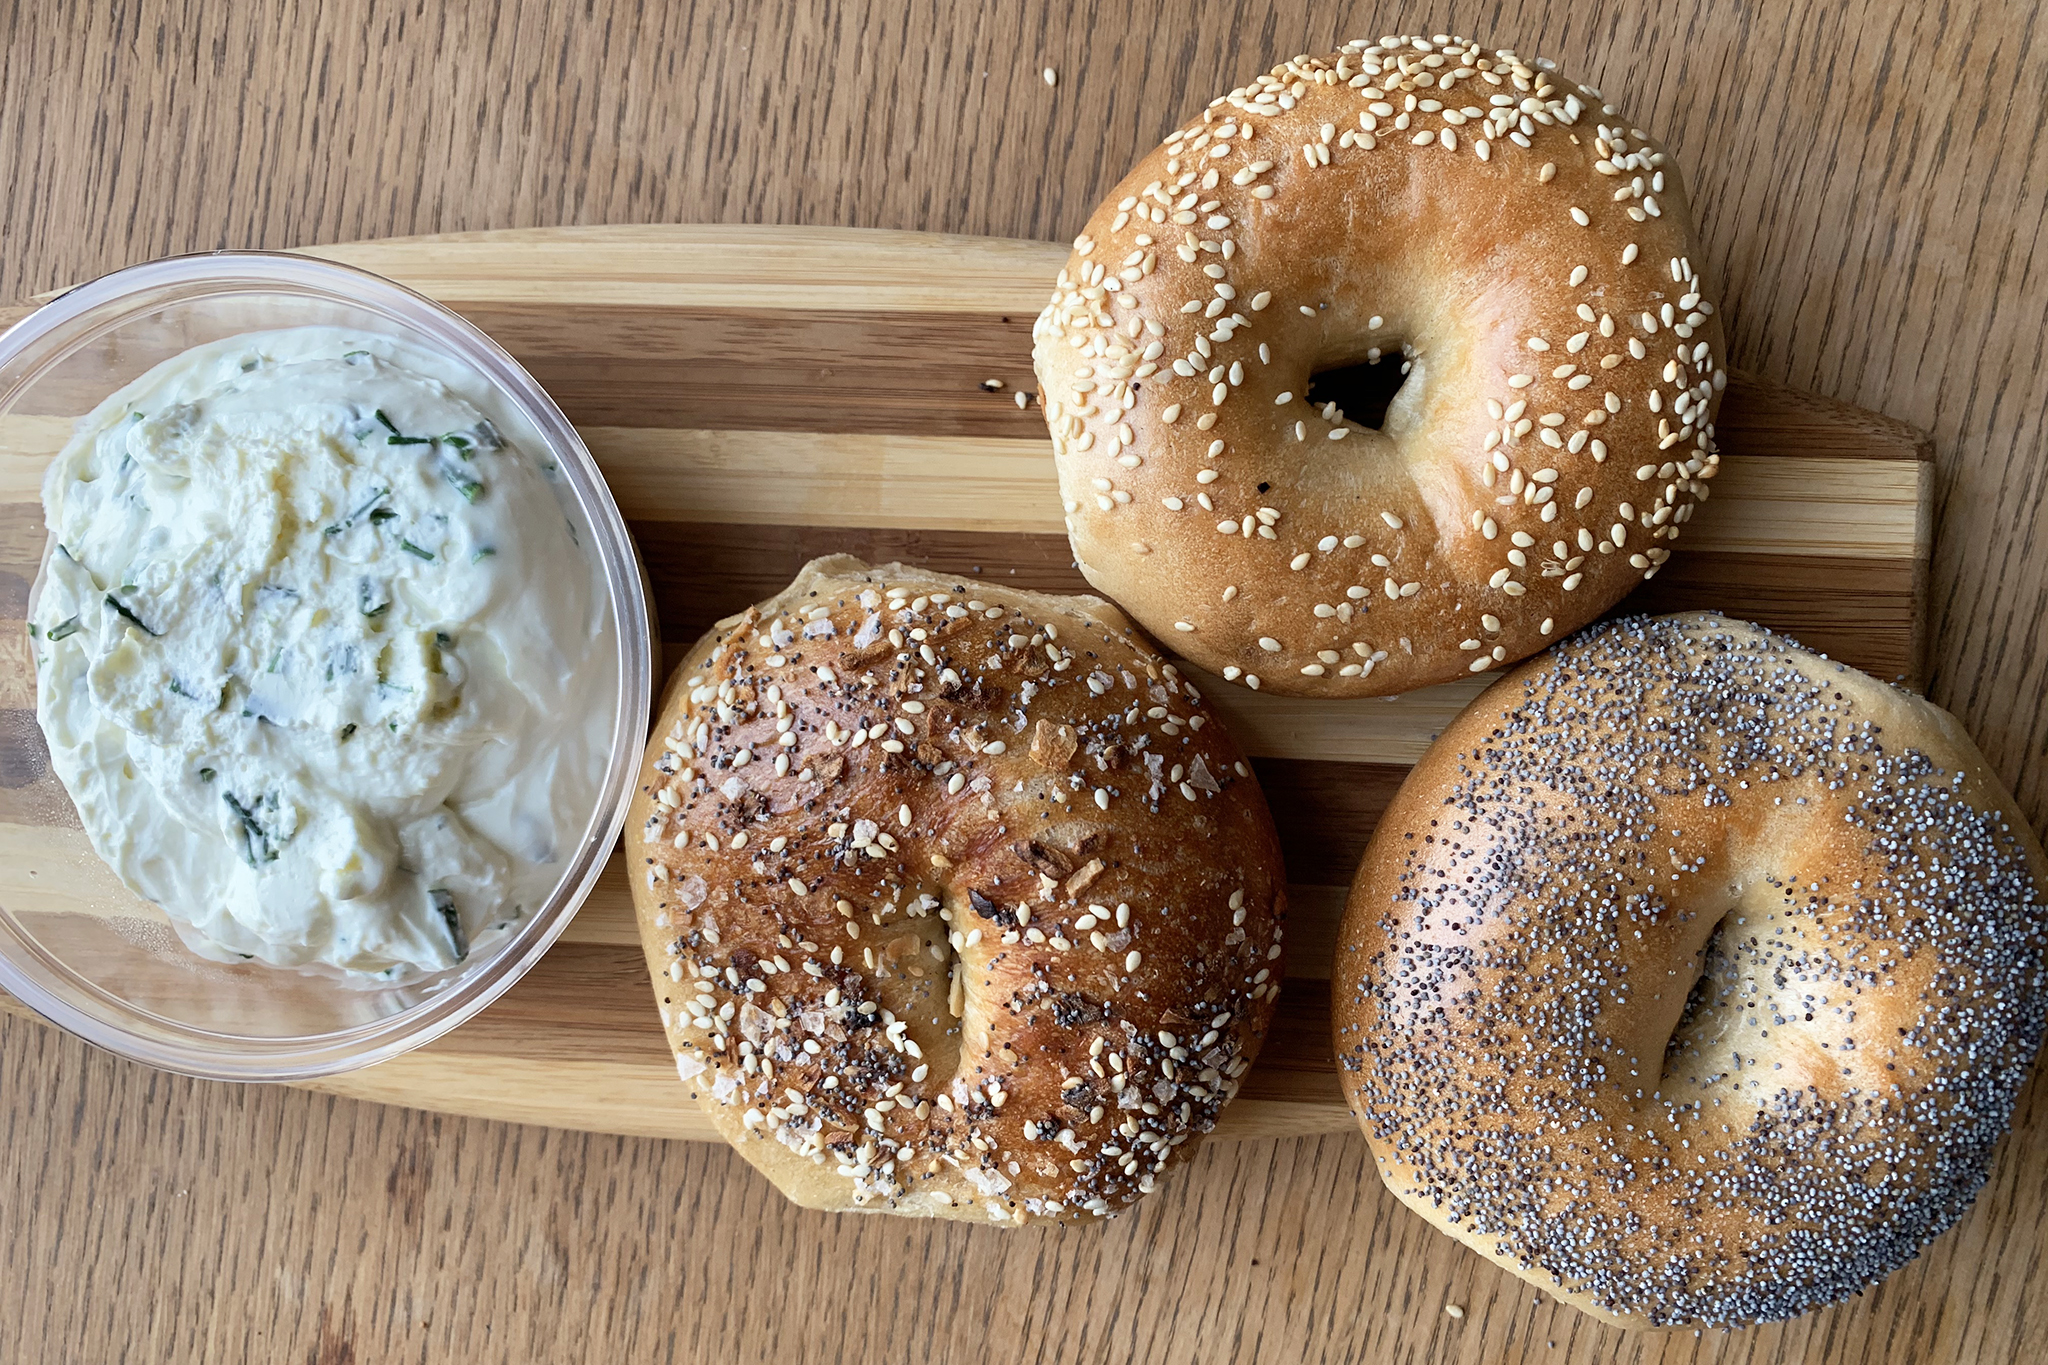 The California bagel scene is better than that of New York, says the New York Times